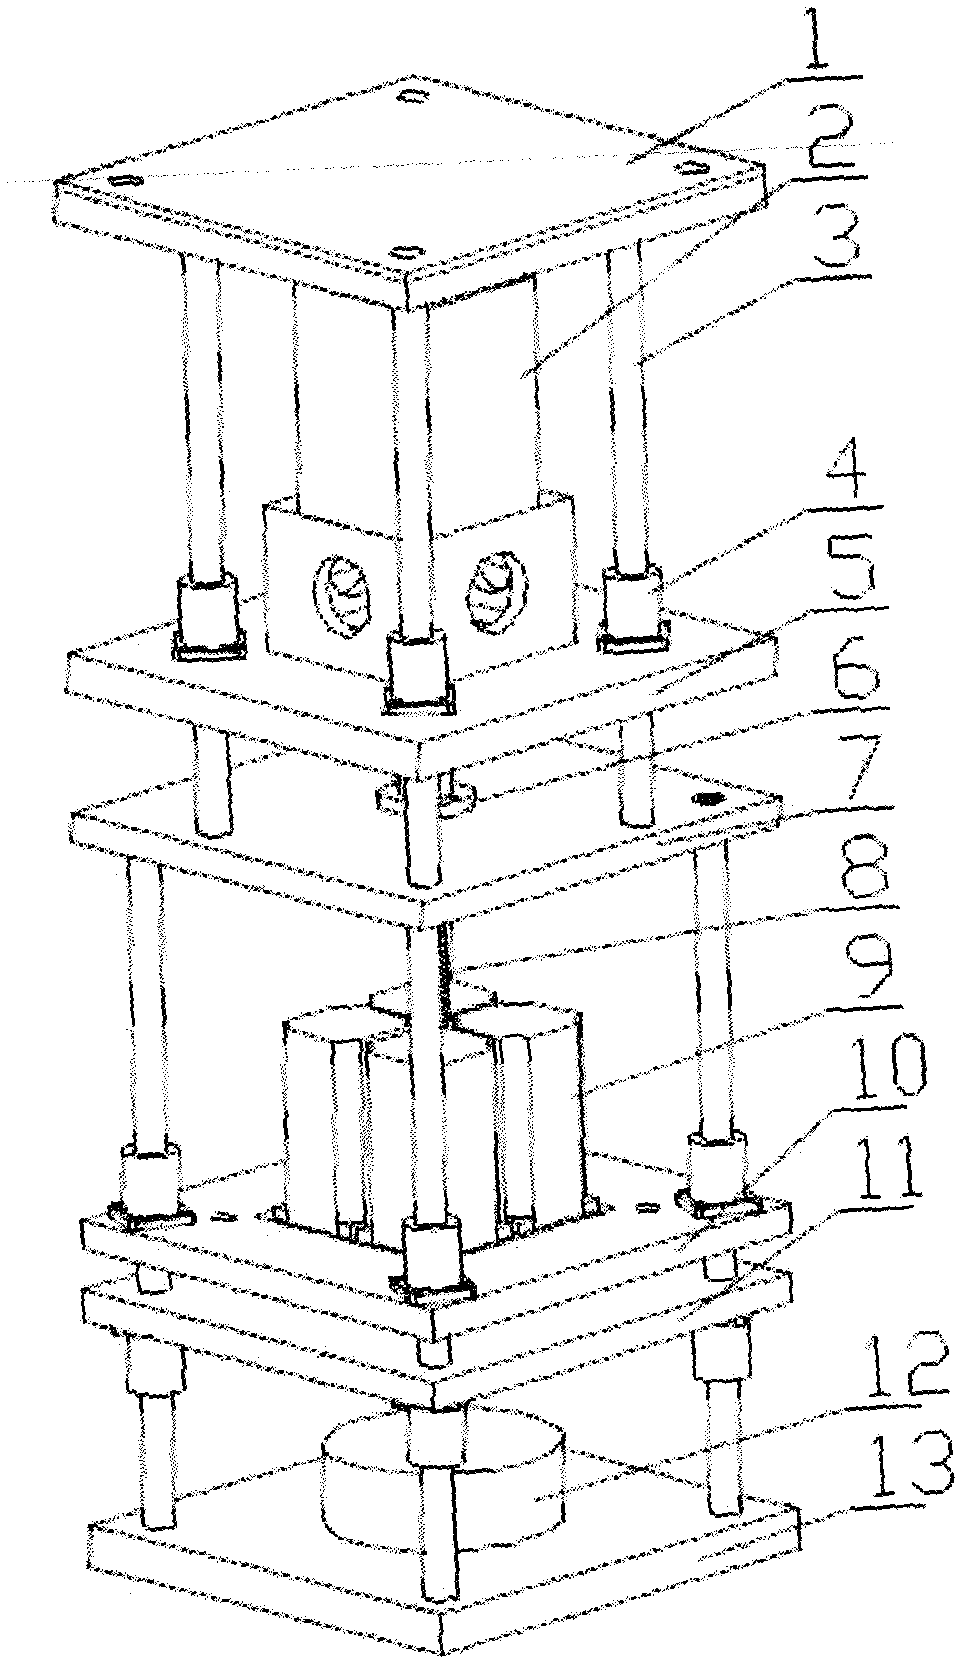 Four-axis linkage pressurized equipment based on diamond anvil cell press